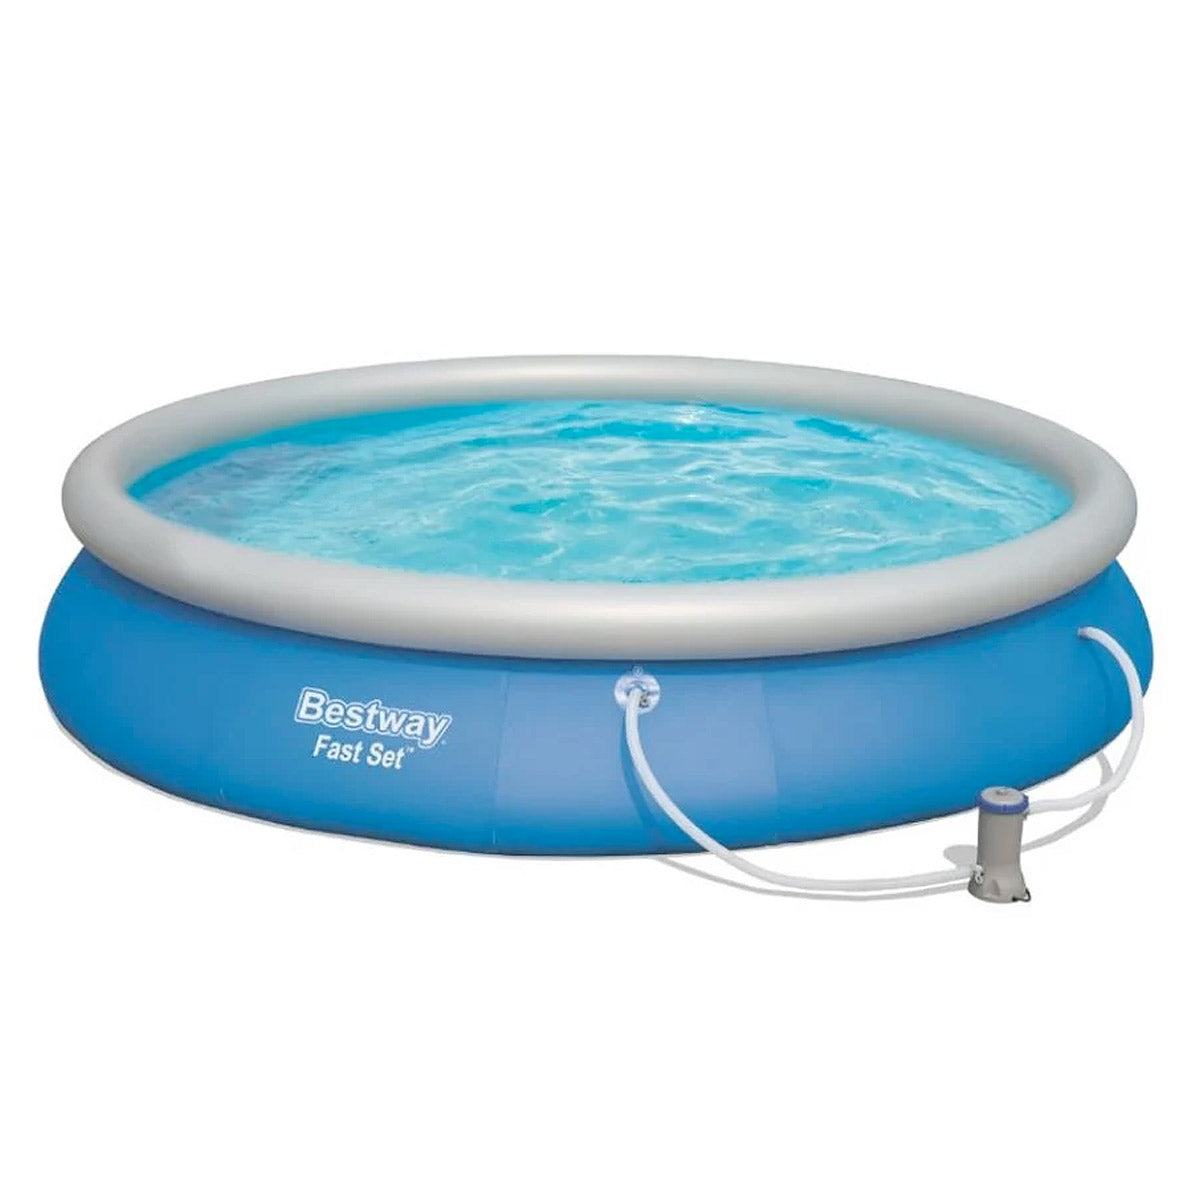 Alberca Inflable Con Bomba Circular Fastset 457 Cm Bestway